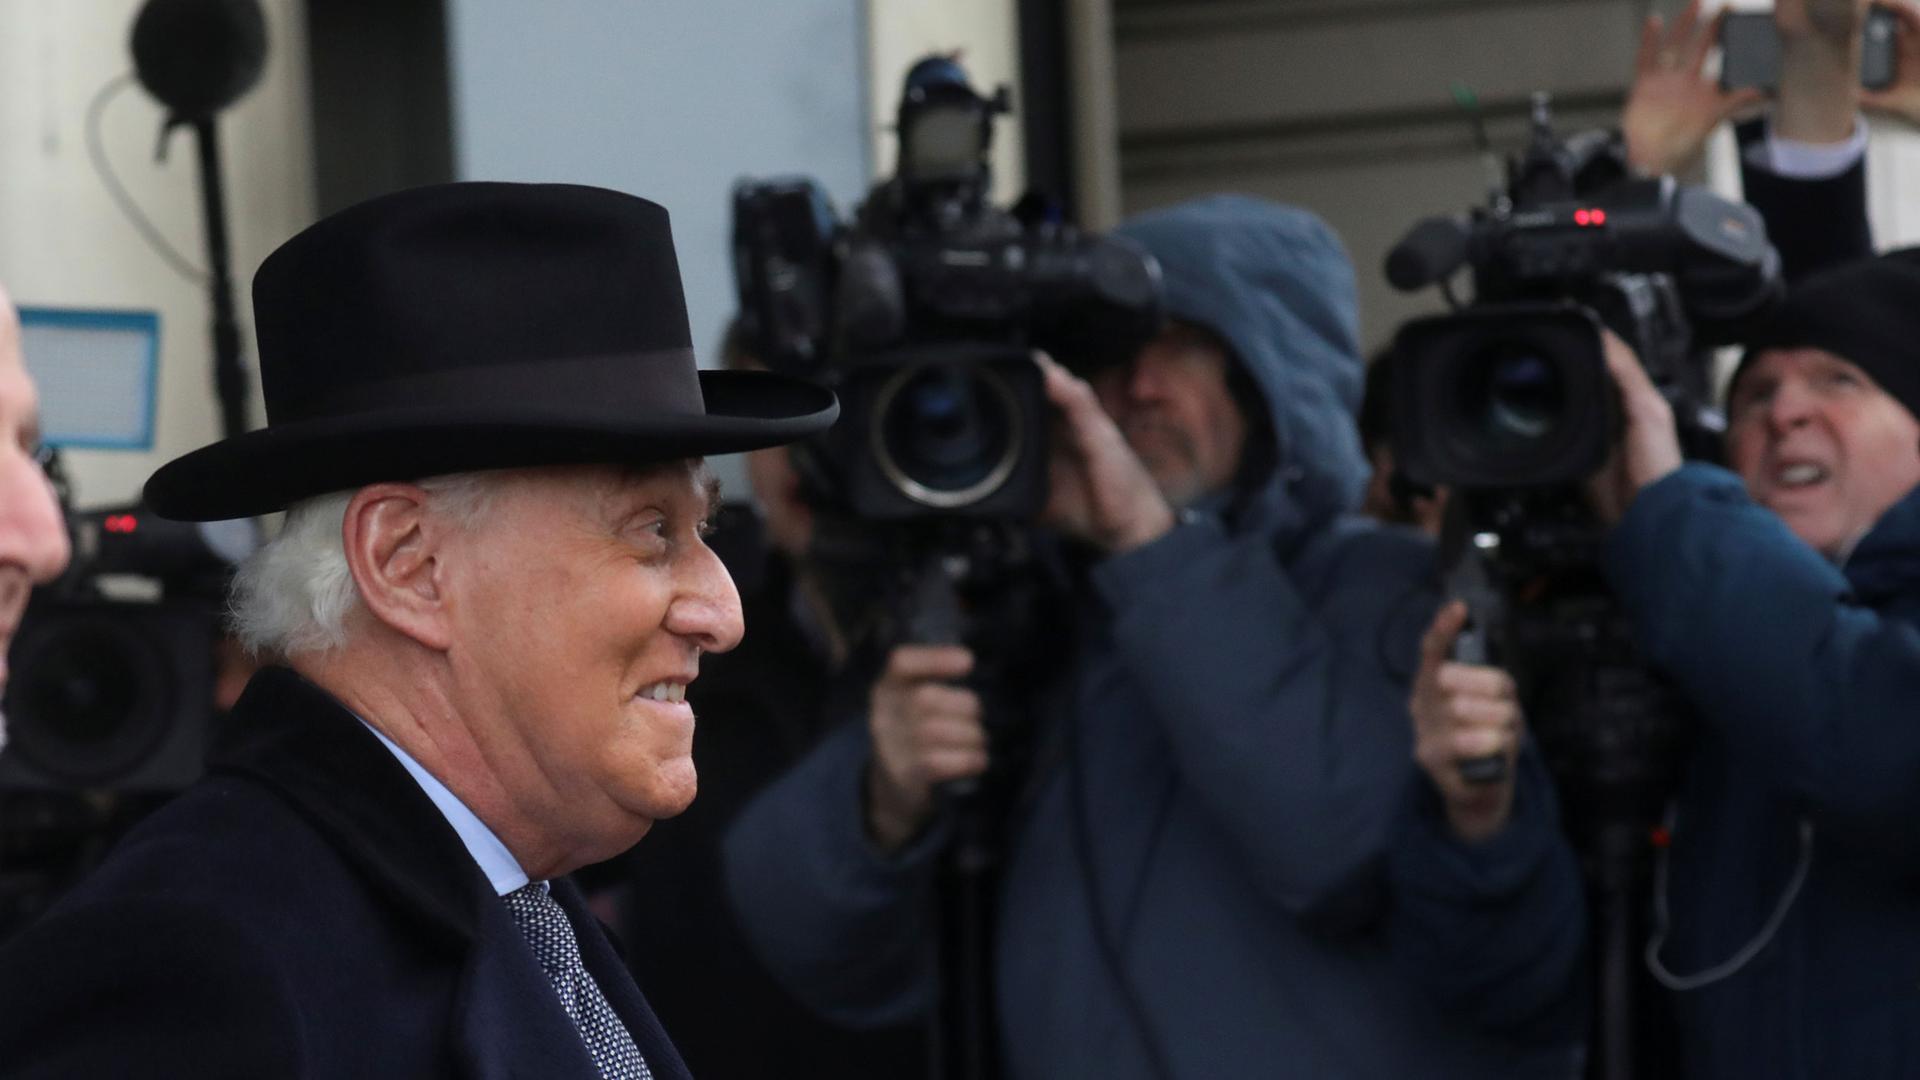 Former Trump campaign adviser Roger Stone is shown wearing a black top hat and overcoat while walking past cameras.